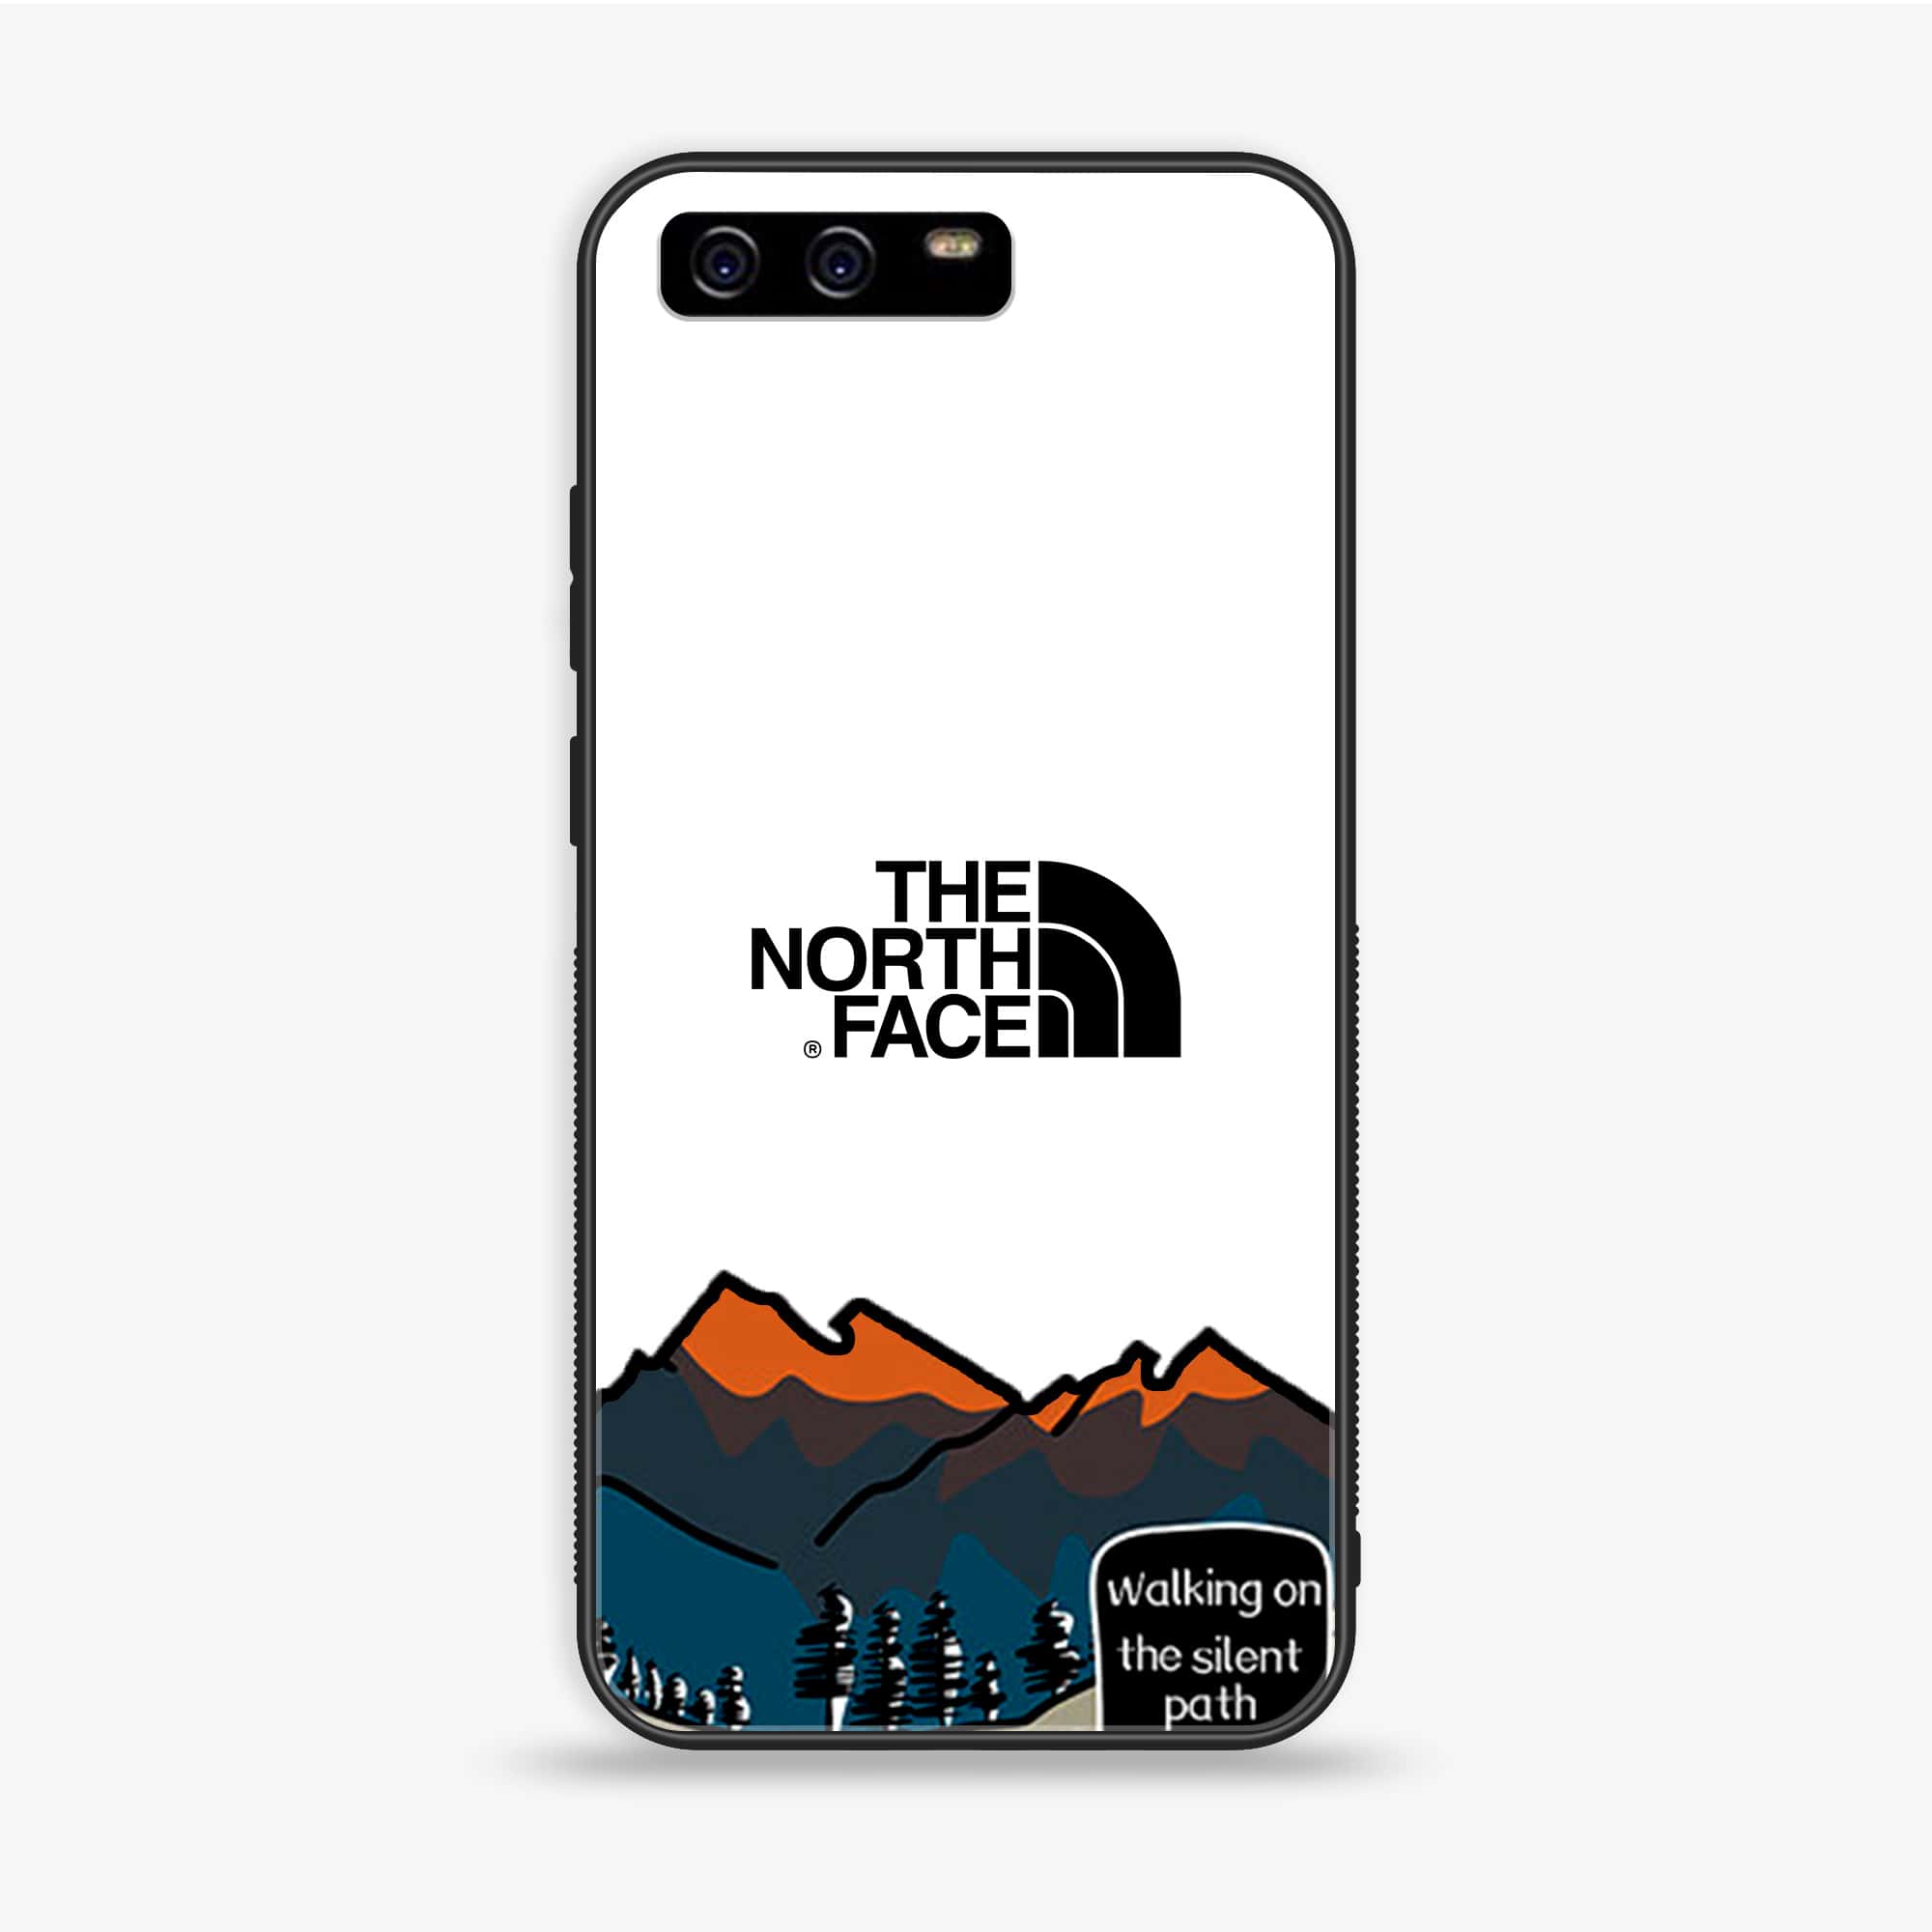 Huawei P10 - The North Face Series Series - Premium Printed Glass soft Bumper shock Proof Case